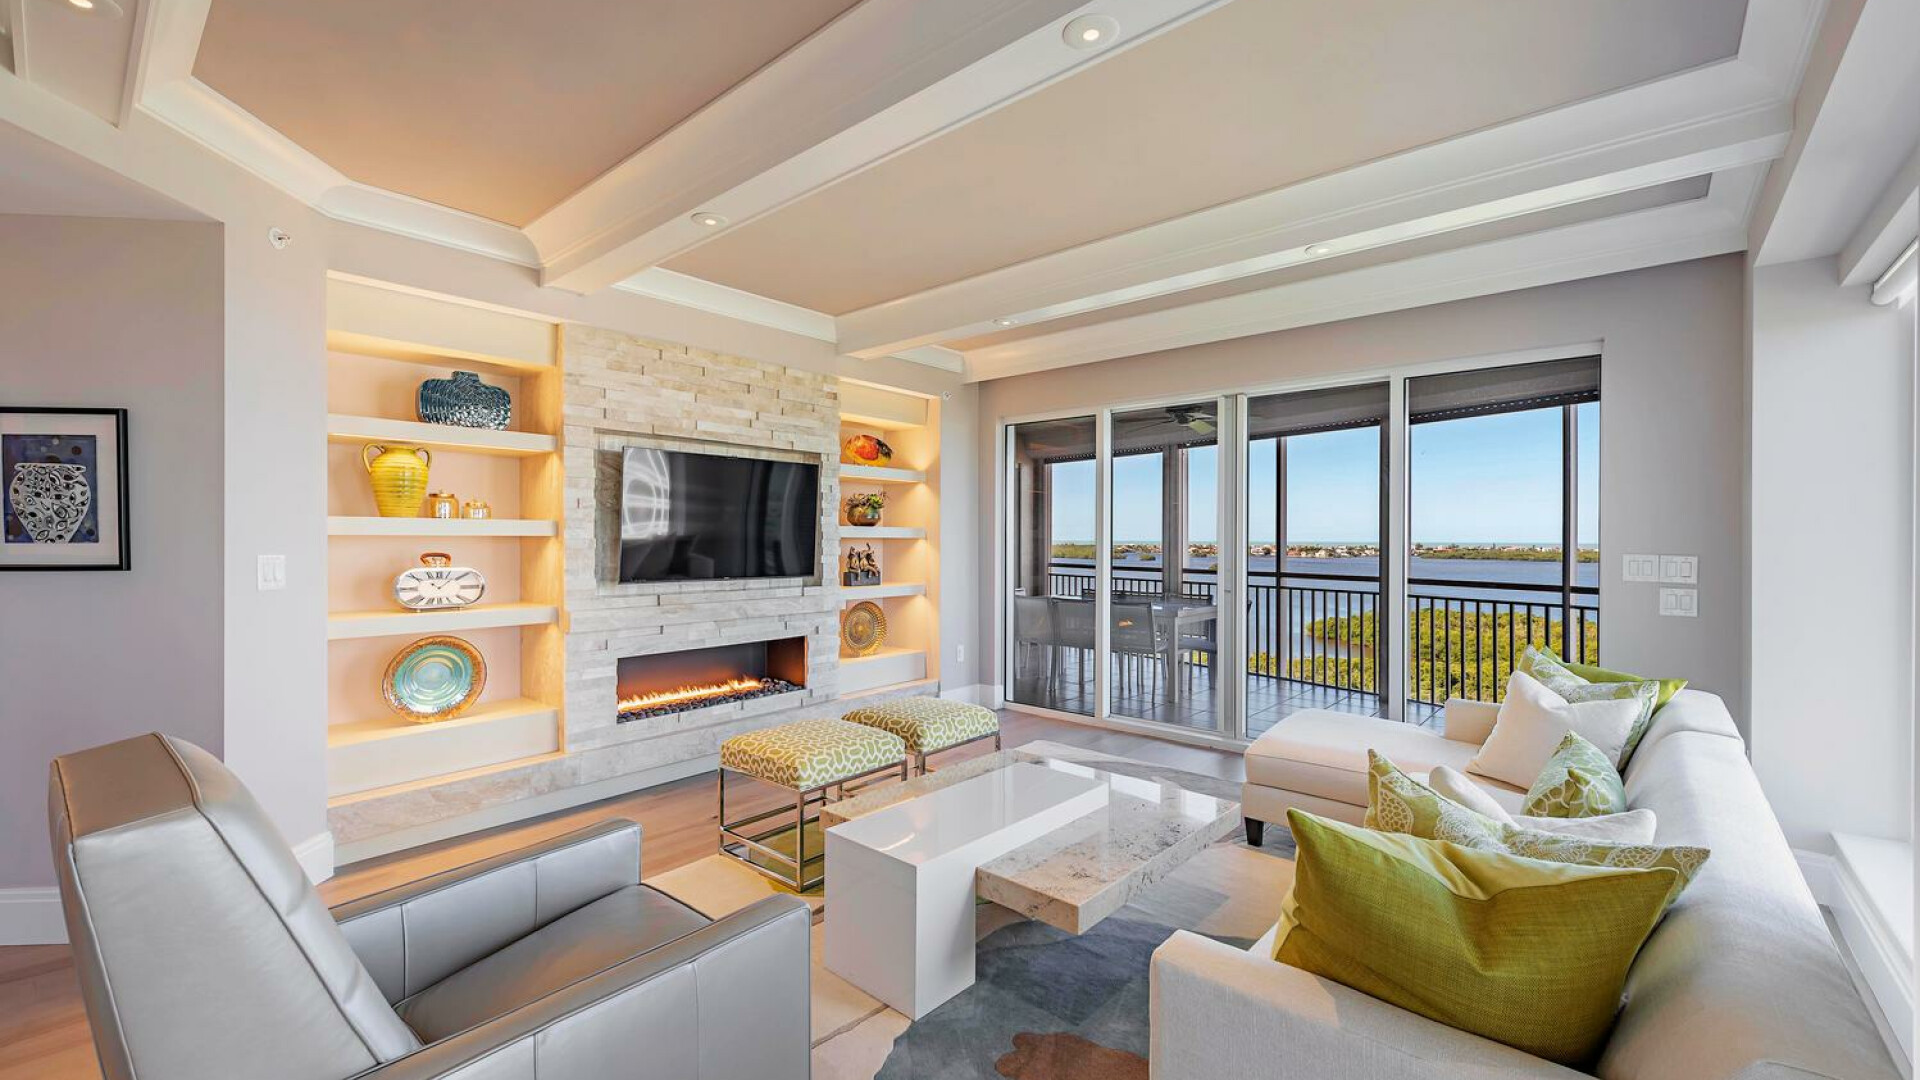 Light and bright luxury condo overlooking the water in Bonita Bay